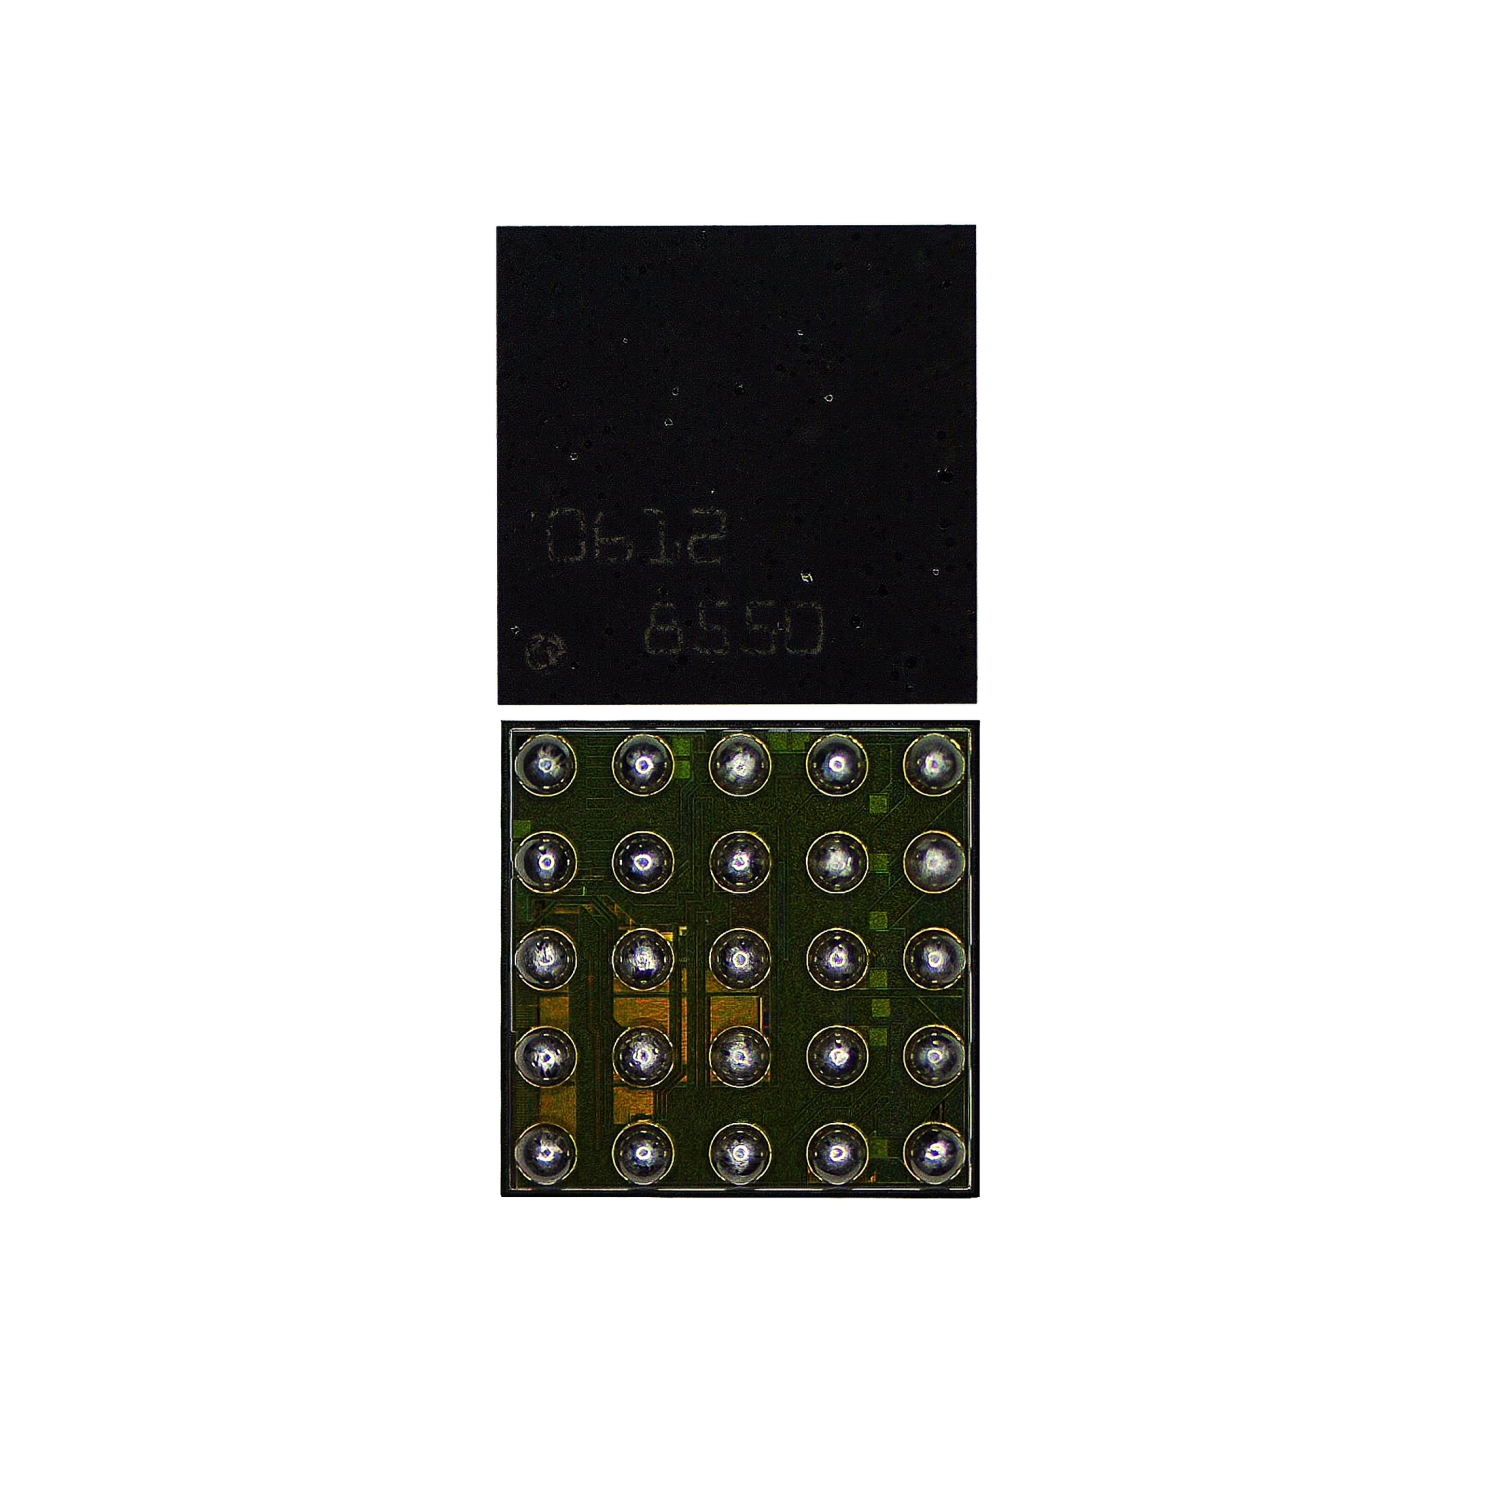 LCD Backlight Driver IC Compatible With MacBook Air 11"/Pro Unibody 13"/15" (A1370/A1465/A1369/A1466/A1278/A1286/Early 2011 To Mid 2017) (LP8550:U7701/U9701:BGA-25 Pin) (10 Pack)